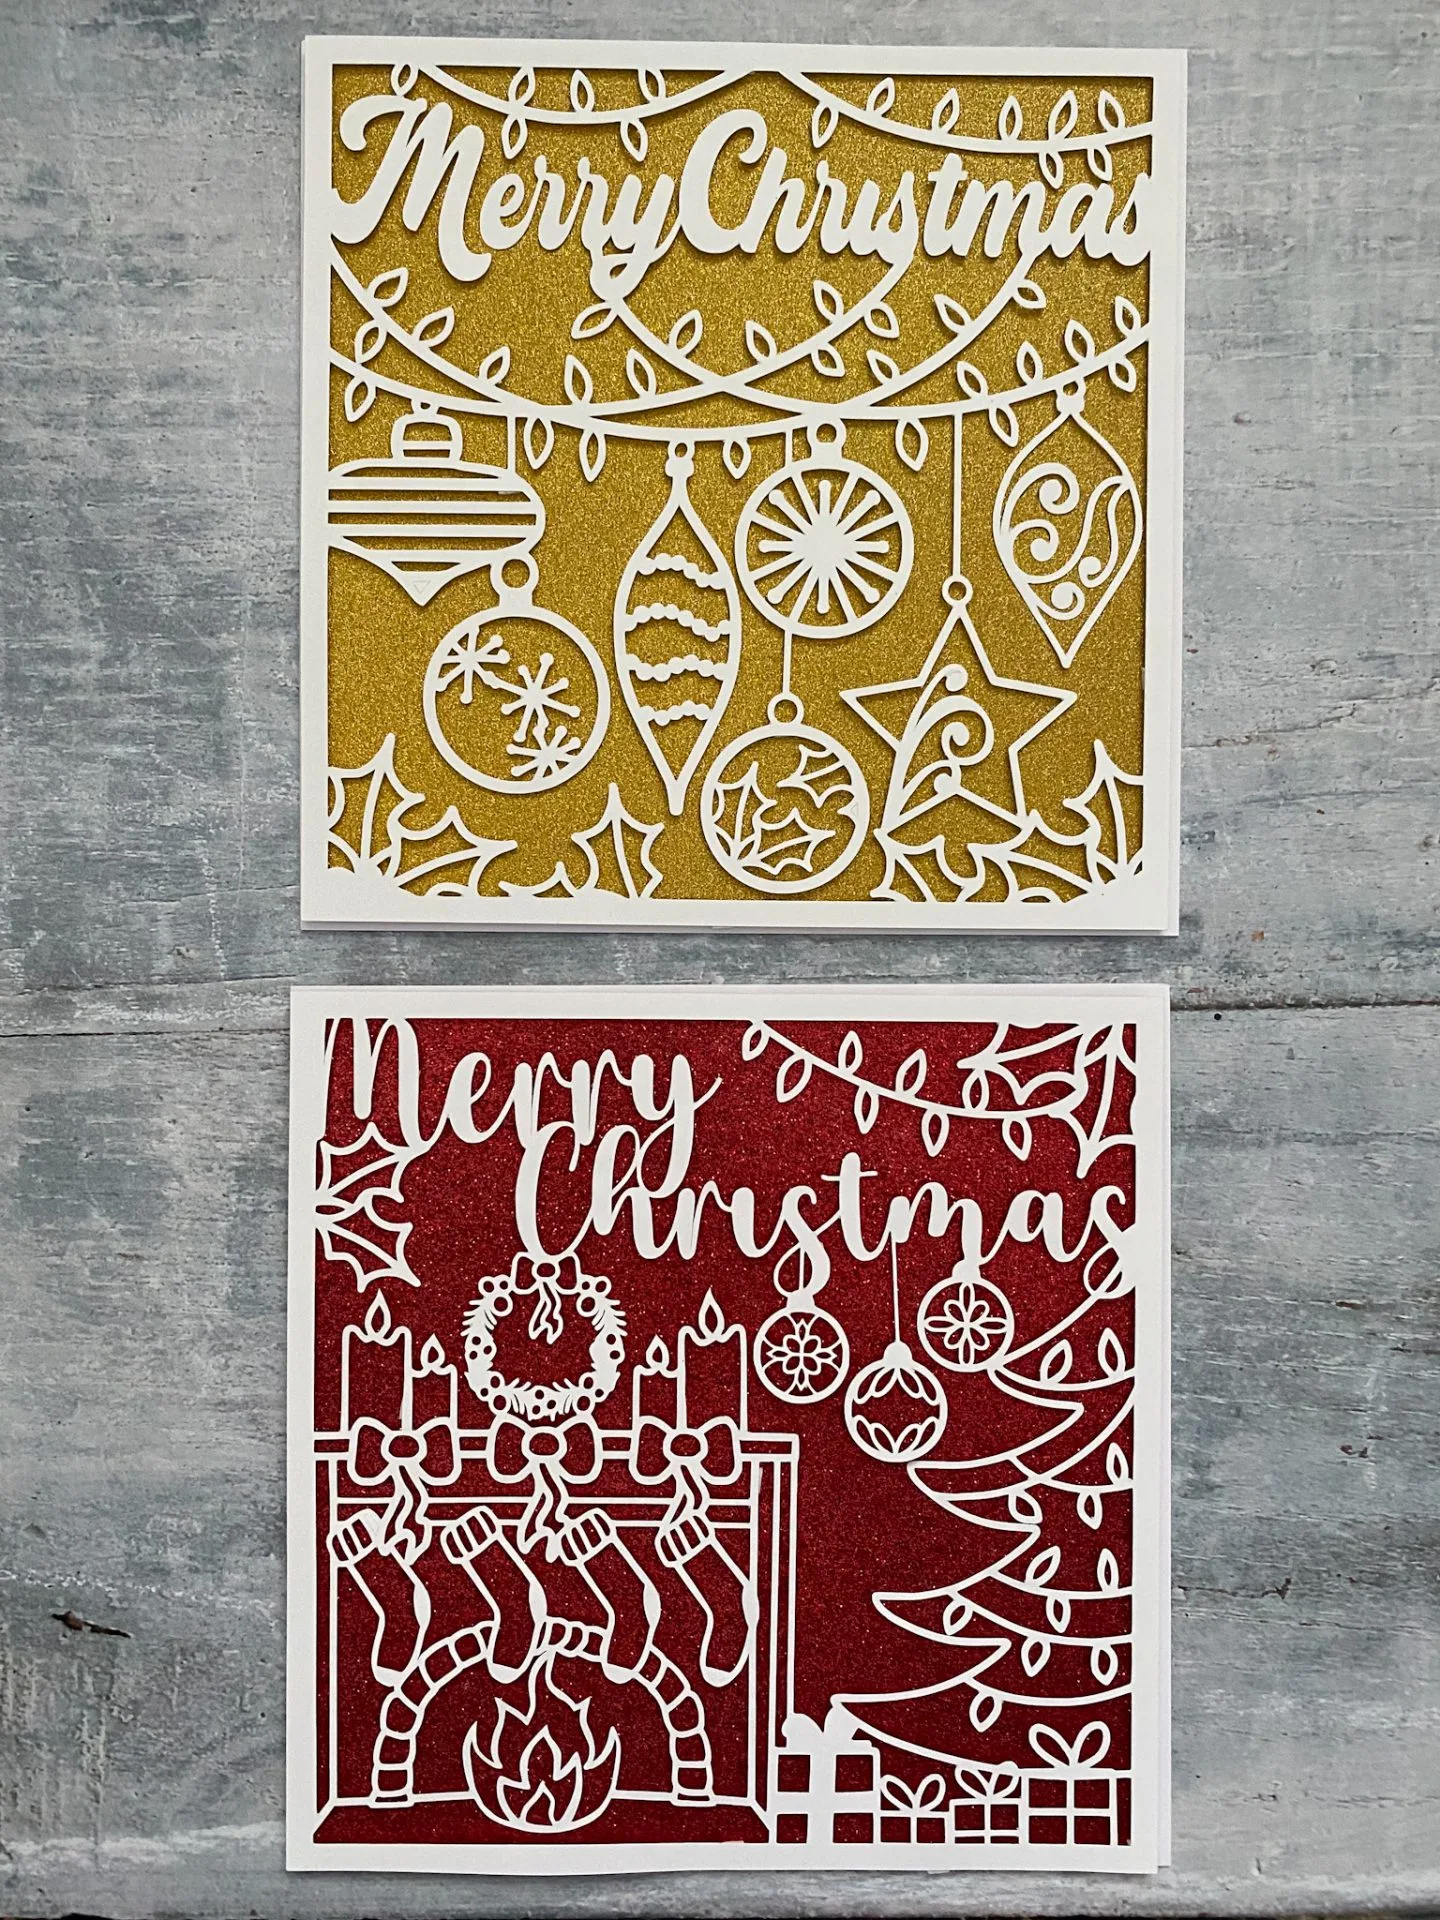 Christmas Card SVGs and Scrapbooking background scenes for cutting out